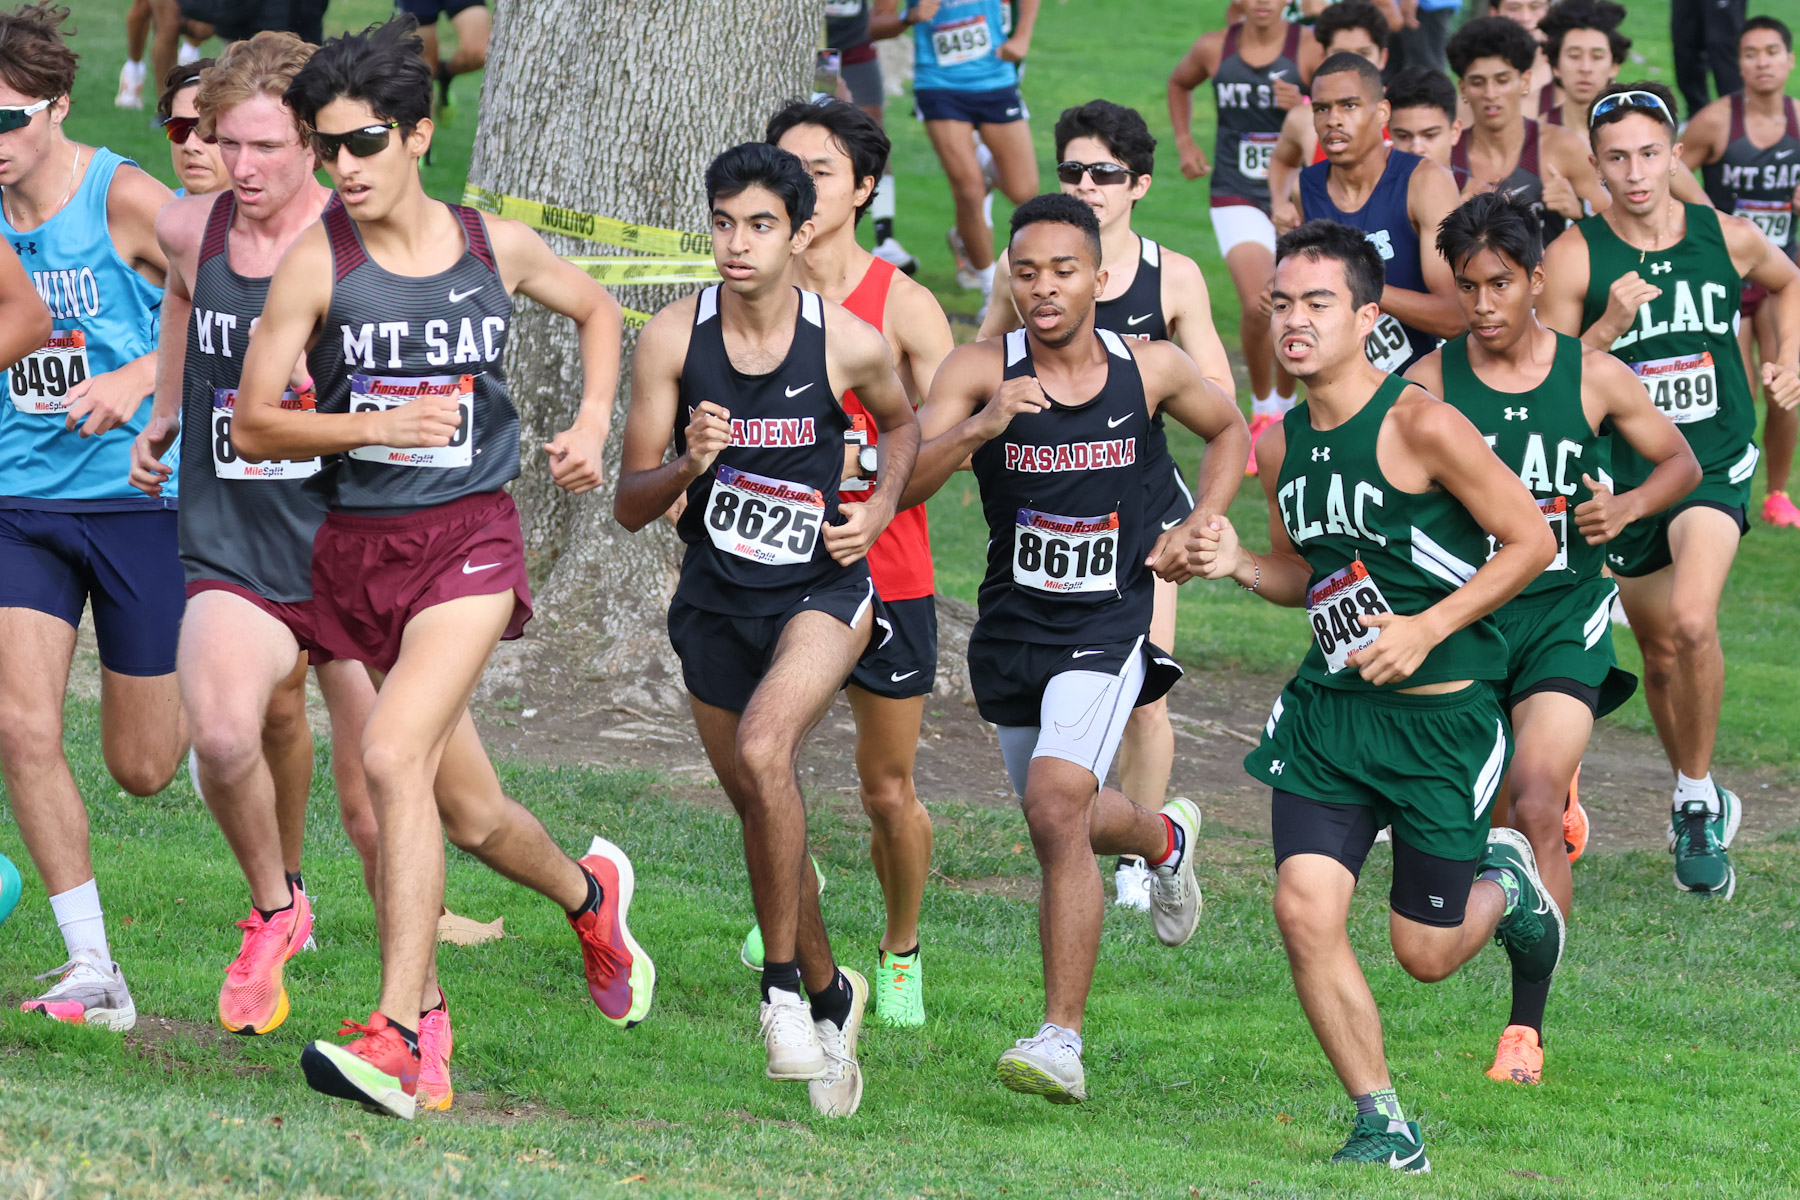 Runners in action at the 2023 SCC Championships in Harbor City (photo by Richard Quinton).